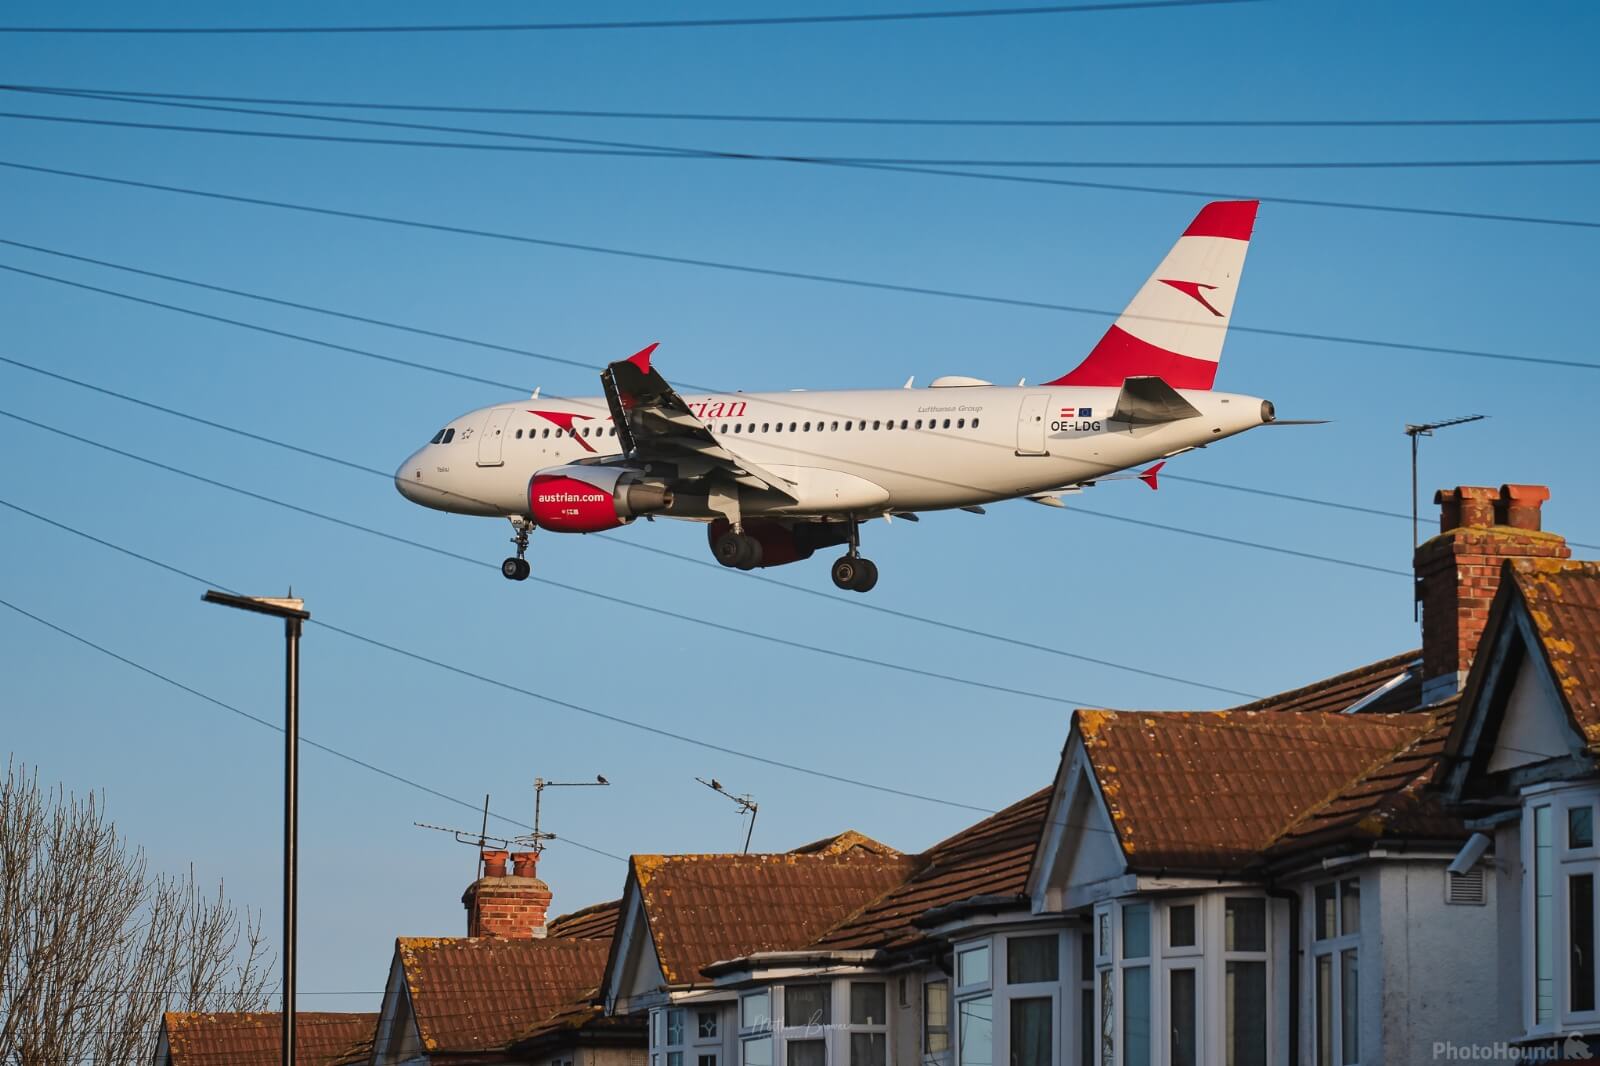 Image of Myrtle Avenue Planespotting by Mathew Browne